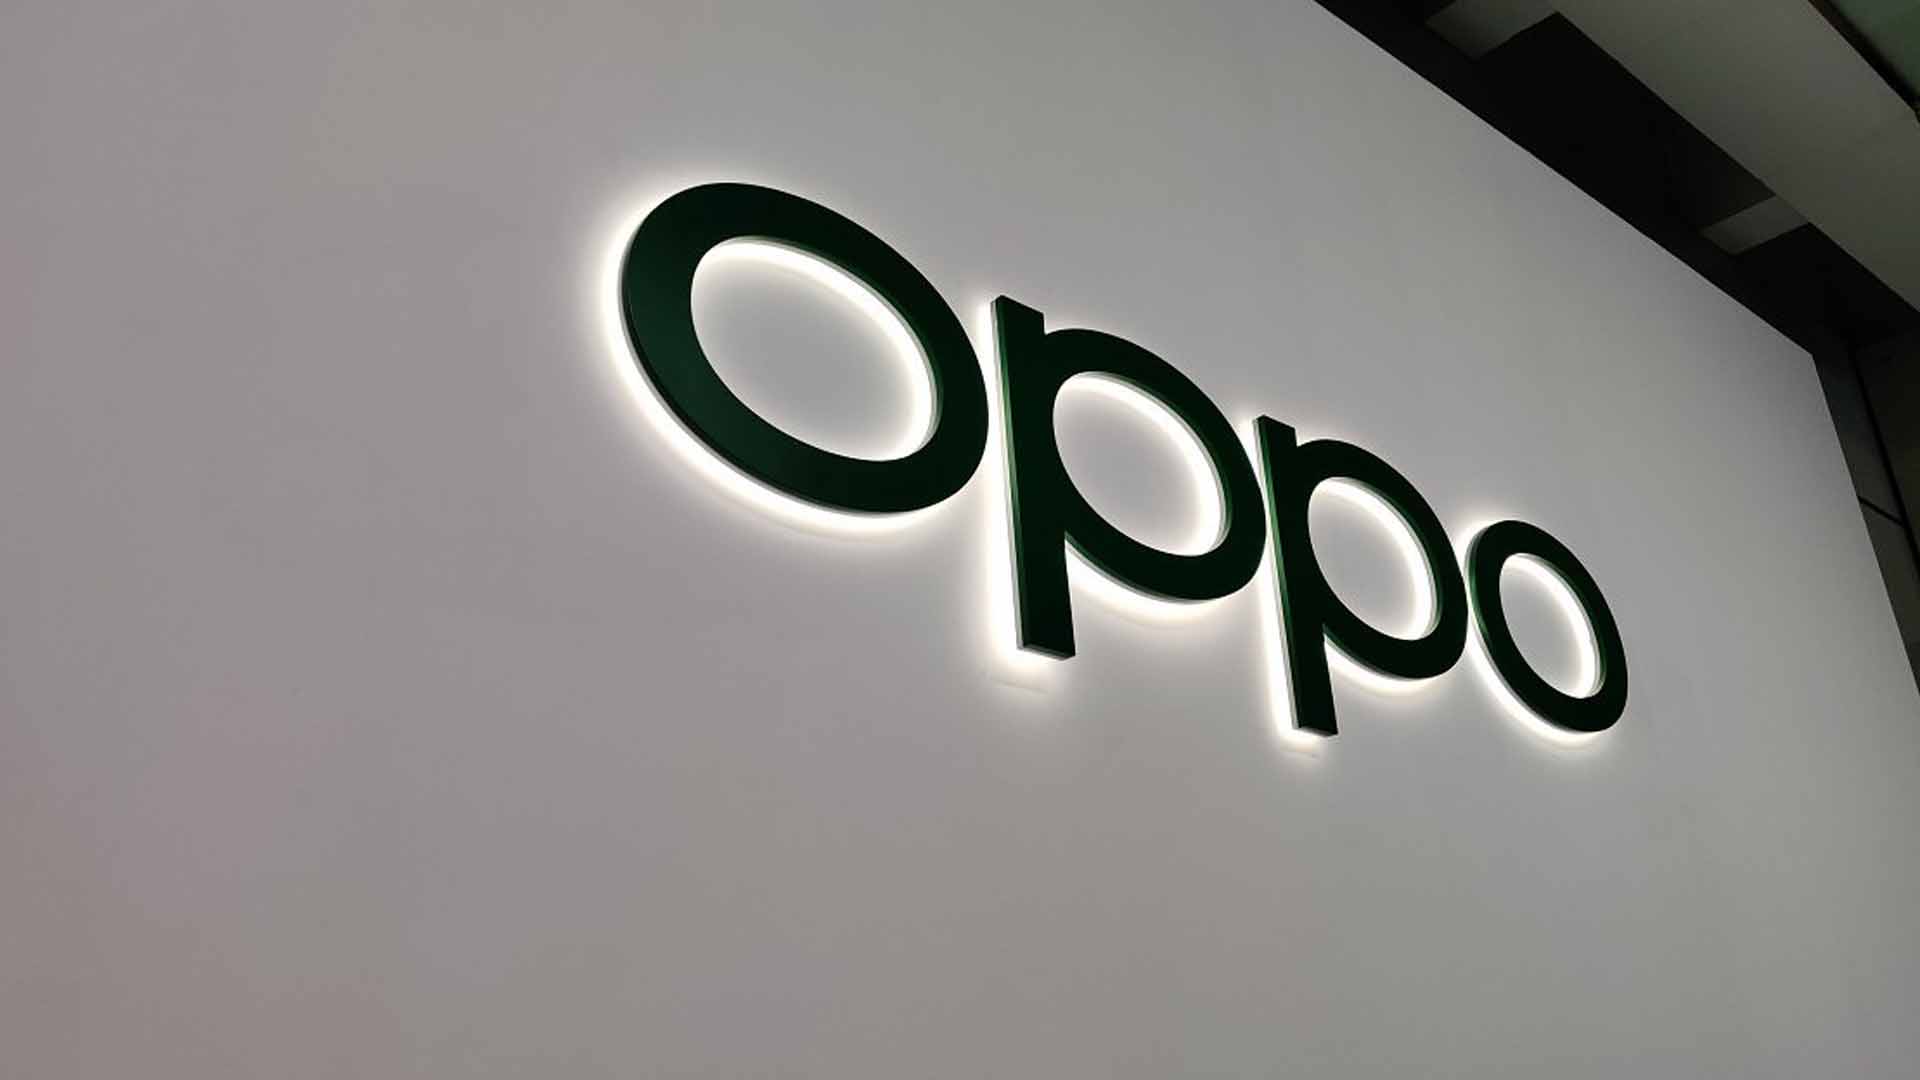 Exciting news about Oppo's upcoming SoC